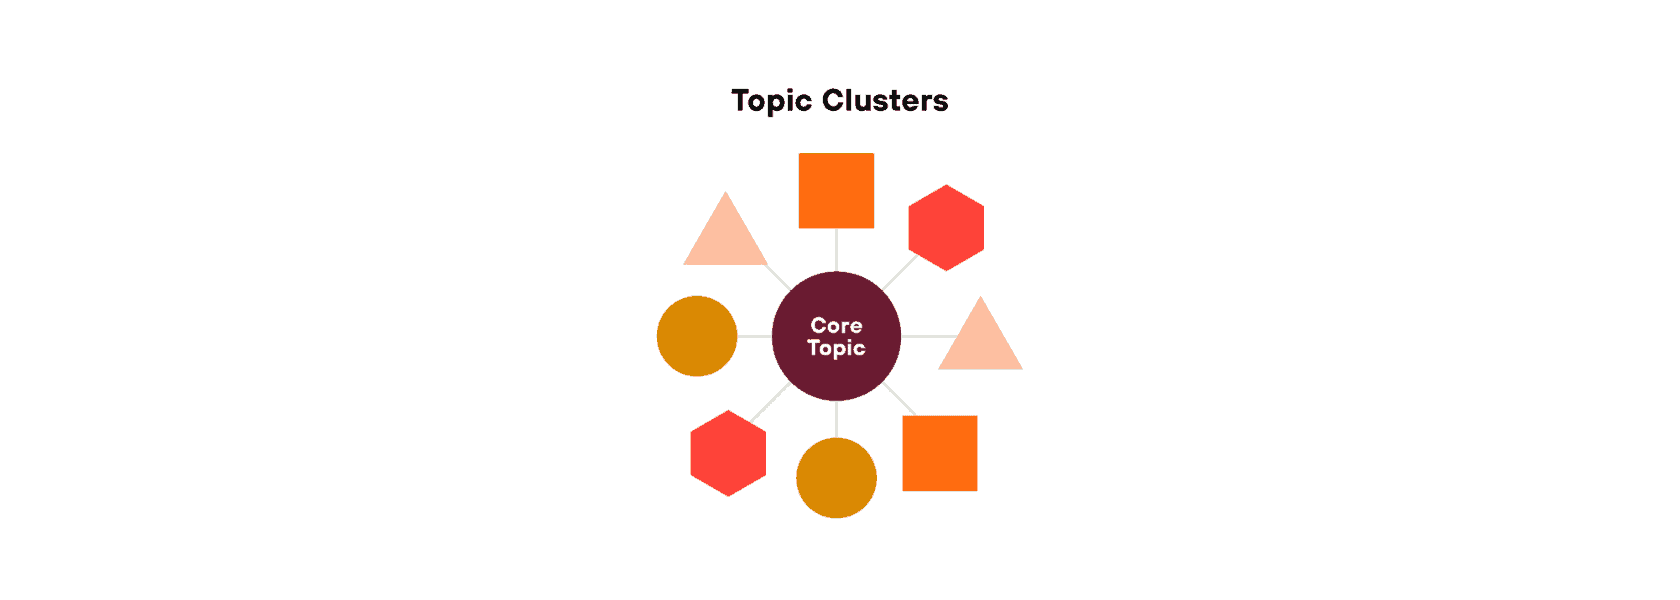 A graphic depicting topic clusters, with a core topic at the centre, and different topics as shapes are branching out from the centre